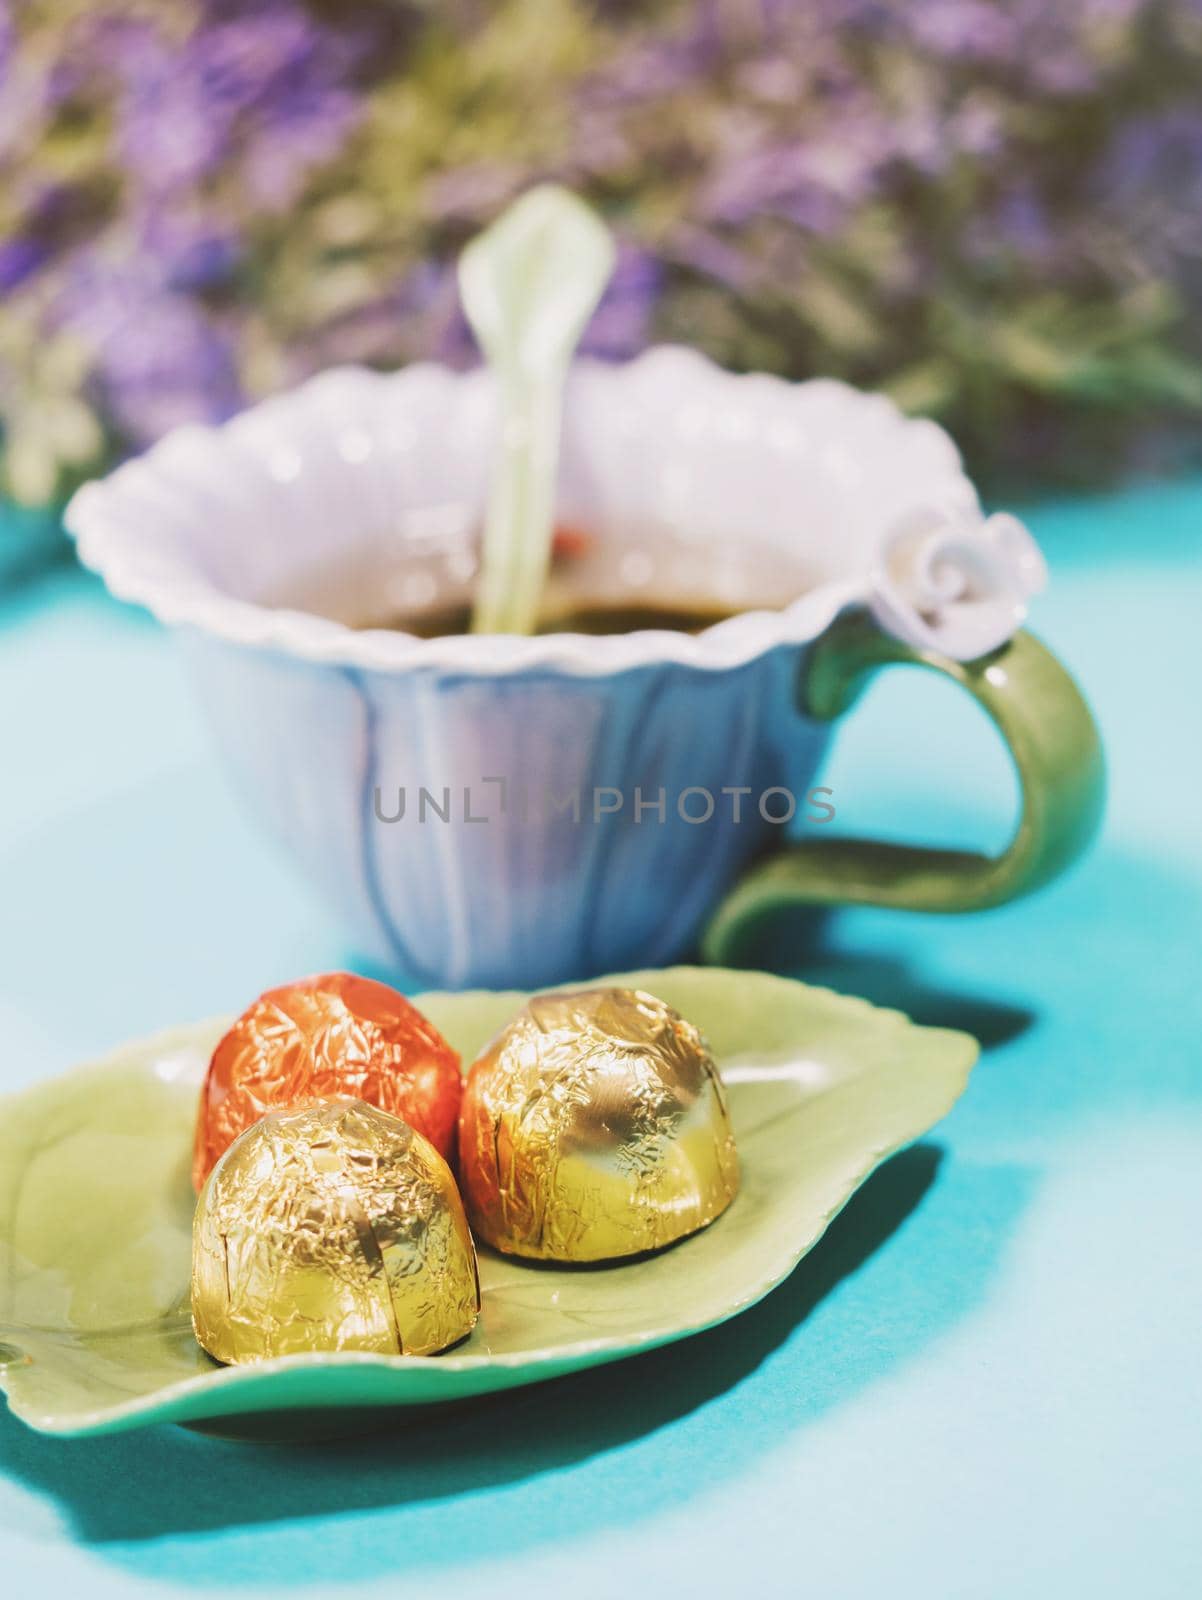 Handmade beautiful flower cup of fragrant tea violet porcelain and candies